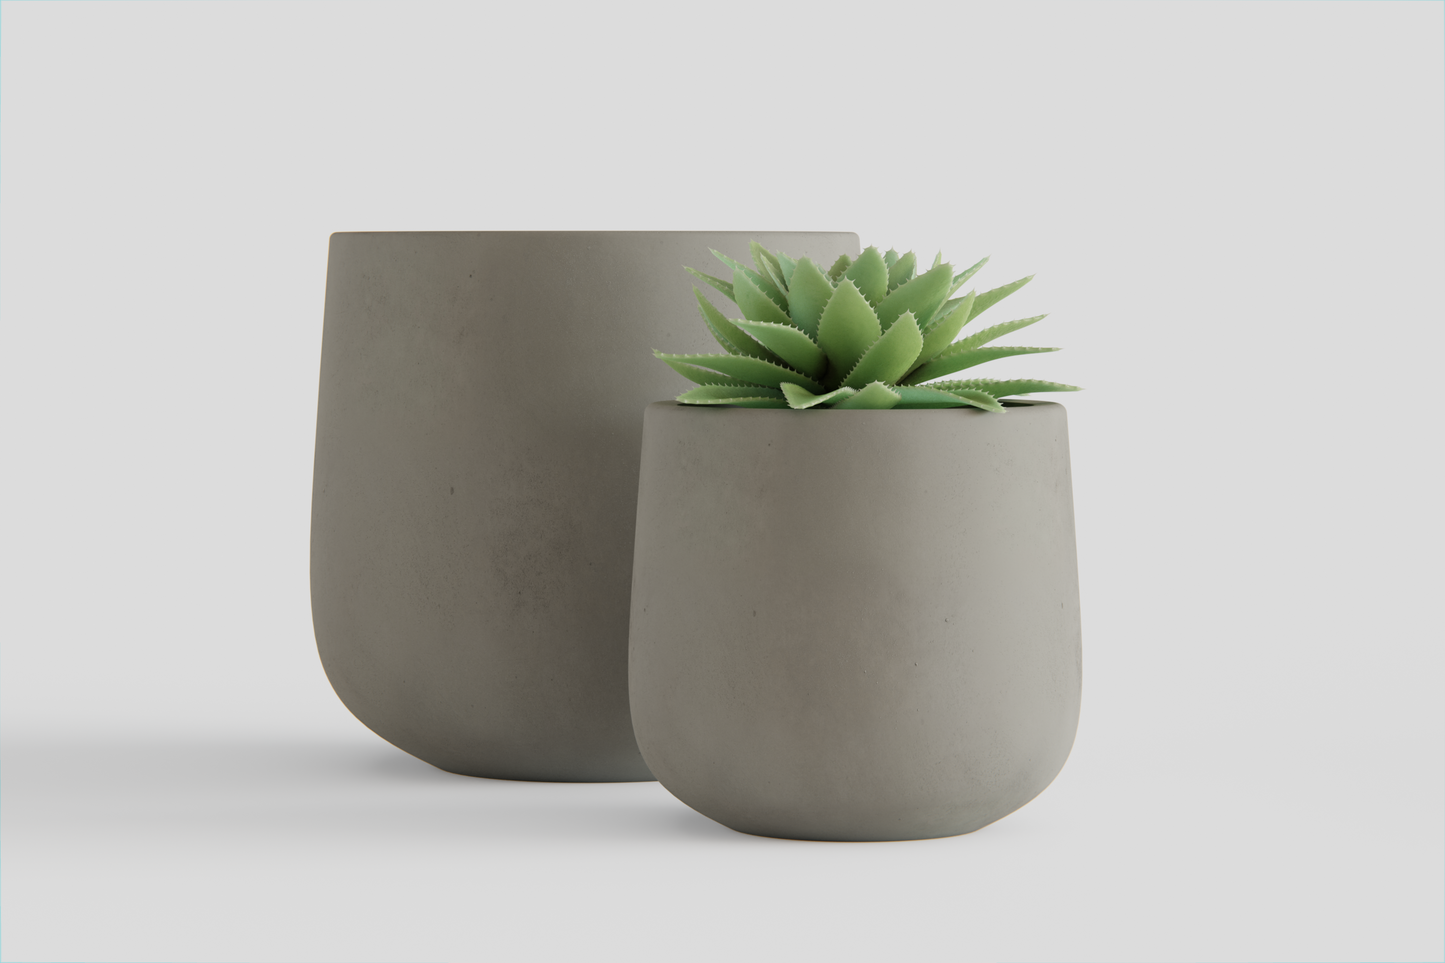 Avera Stone Cement Century Planter Set of 2 (4" & 6") - Natural - Made in the USA